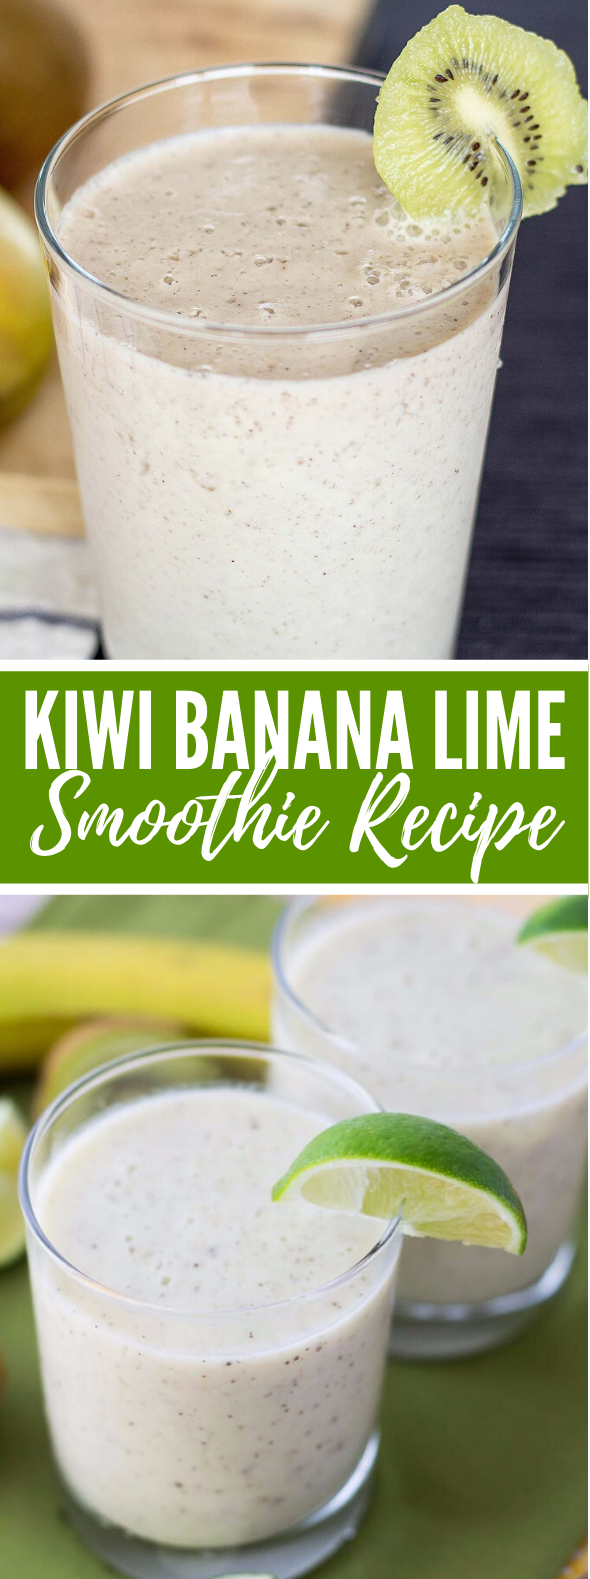 Kiwi Smoothie Recipe with Banana and Lime #drinks #healthy